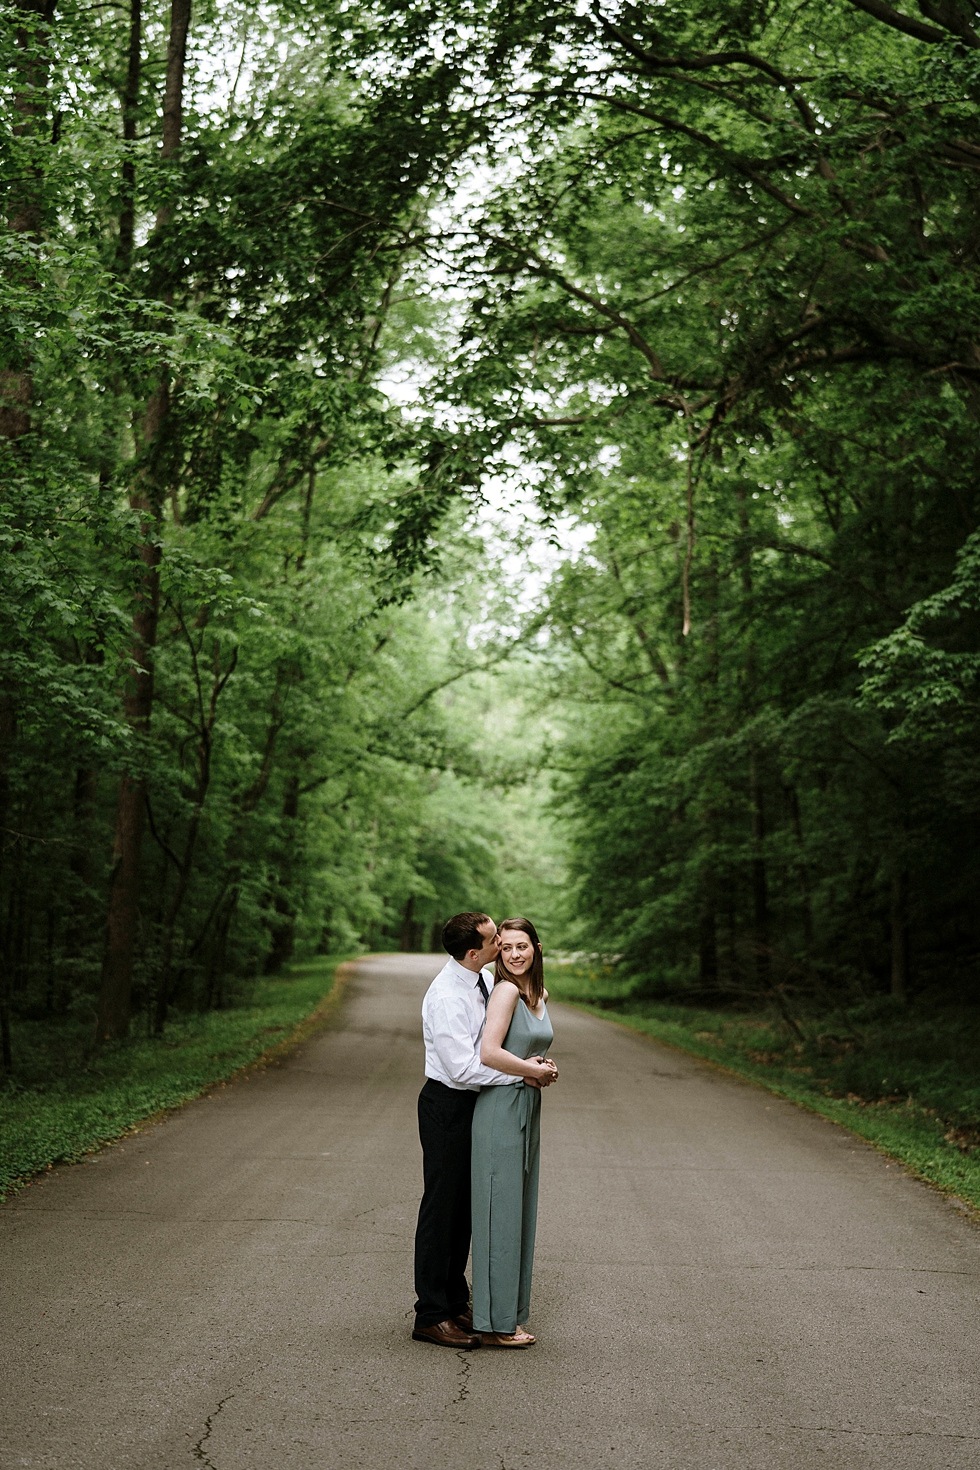  So happy they could burst at this lovely engagement shoot in the Bernheim forest in Louisville Kentucky. spring engagement photoshoot Bernheim forest Louisville Kentucky photography by Lauren fiancé wedding announcement photos love getting married s